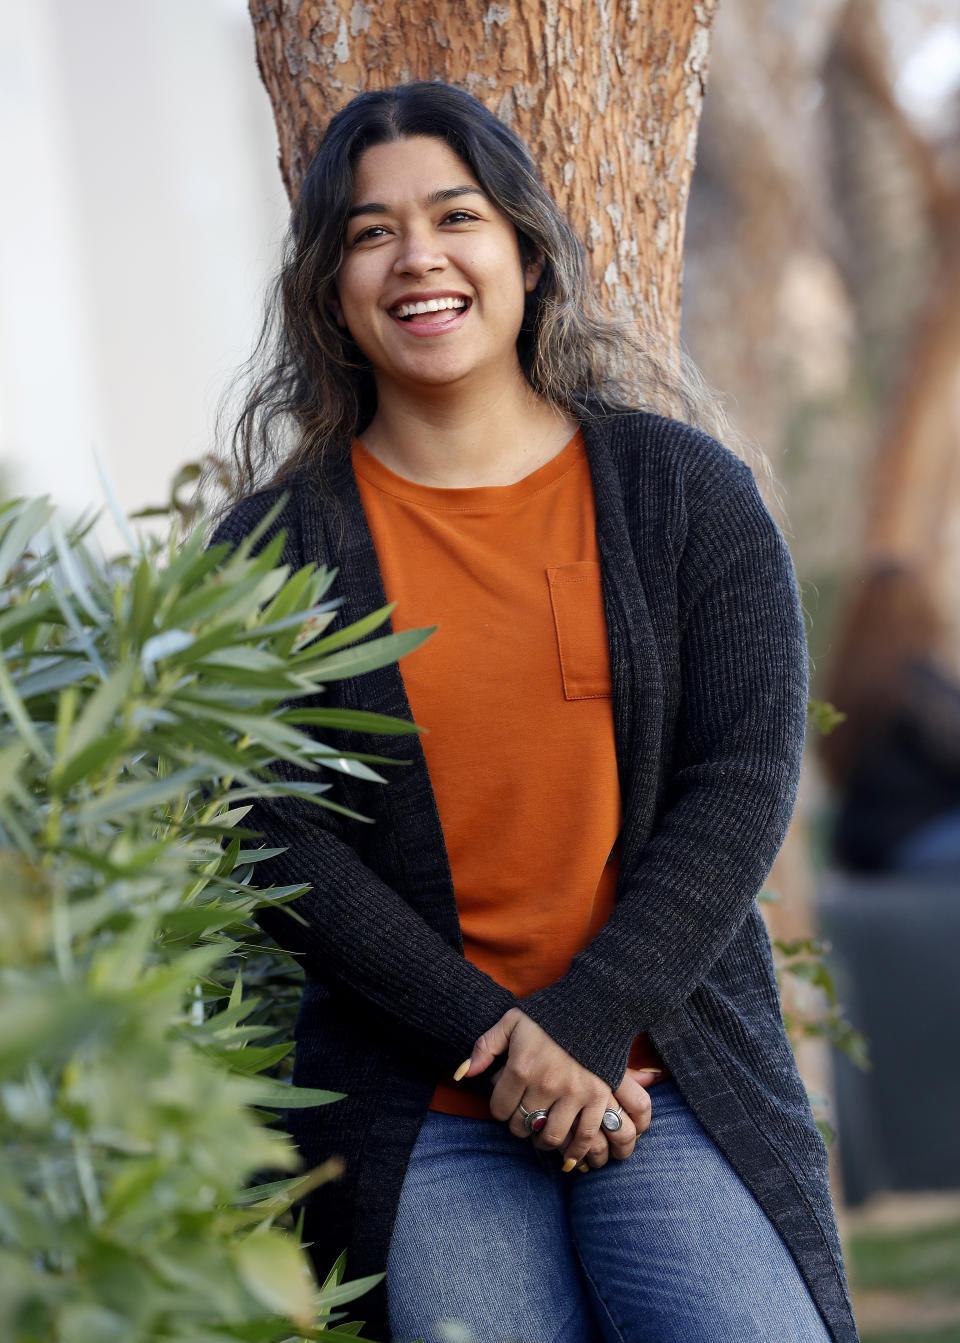 Maxima Guerrero poses for a photo in Phoenix on Wednesday, Jan. 23, 2019. Immigrants who were brought to the U.S. as children see little reason to be hopeful about the latest proposal to extend protections to them as part of President Donald Trump's plan to reopen the federal government. Guerrero, a Phoenix activist who has had Deferred Action for Childhood Arrivals program (DACA) protections since 2013, the court challenges, the politics and the perpetual debate involving the program has taken an emotional toll. (AP Photo/Matt York)